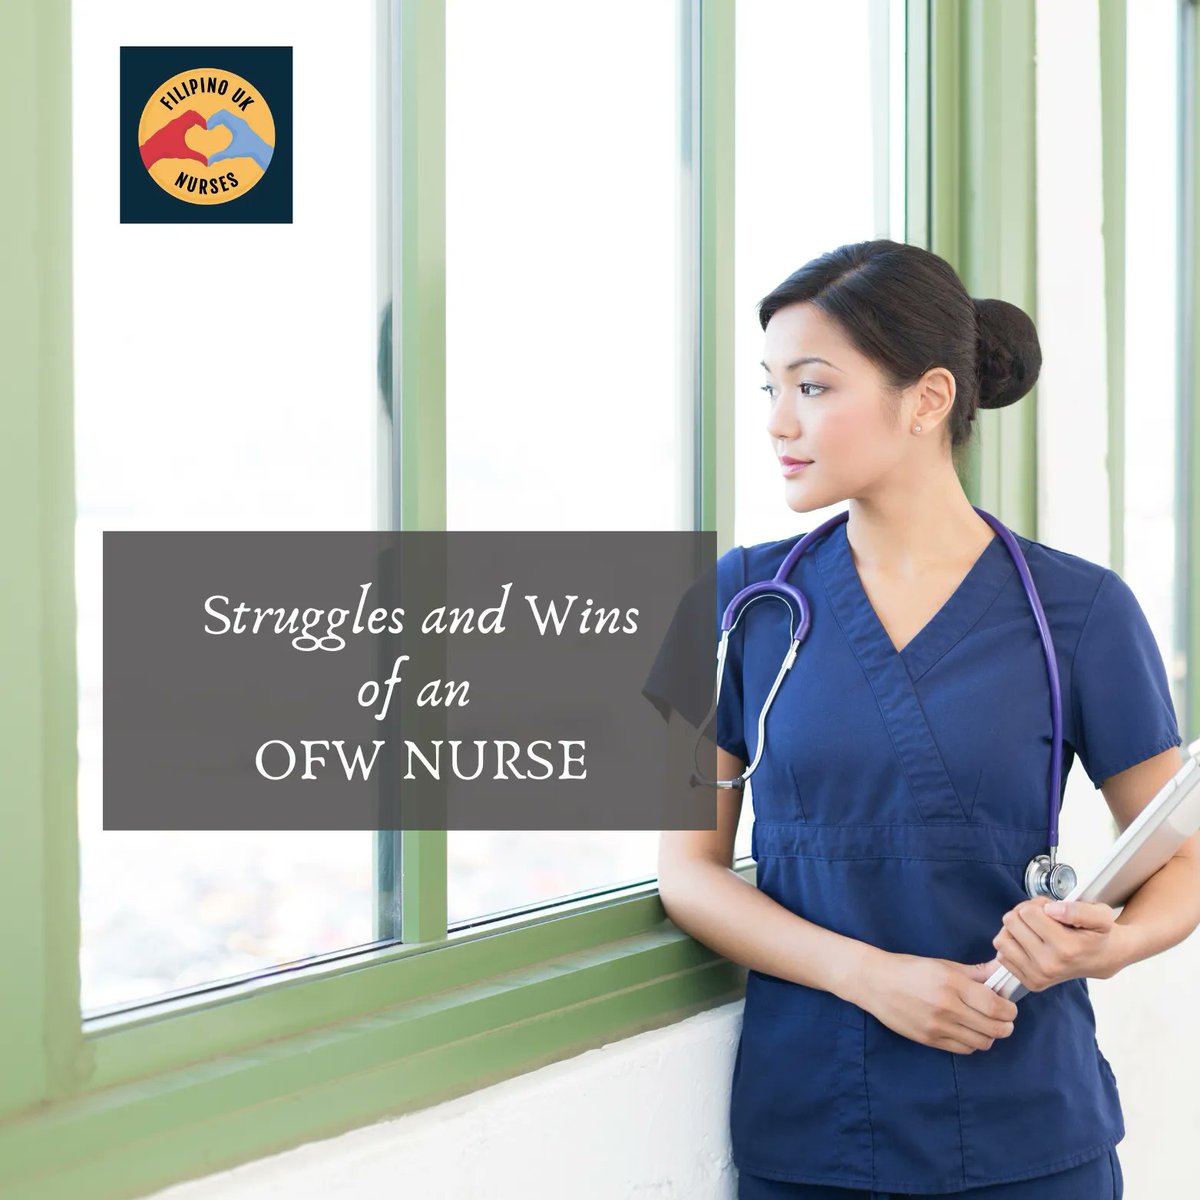 filipinouknurse.com/post/struggles… In this article, we will explore the diverse STRUGGLES and WINS encountered by OFW nurses, giving voice to the hurdles you have faced or may still be encountering. @filipinonurseuk @PNA_UKnurses #nurse #ofw